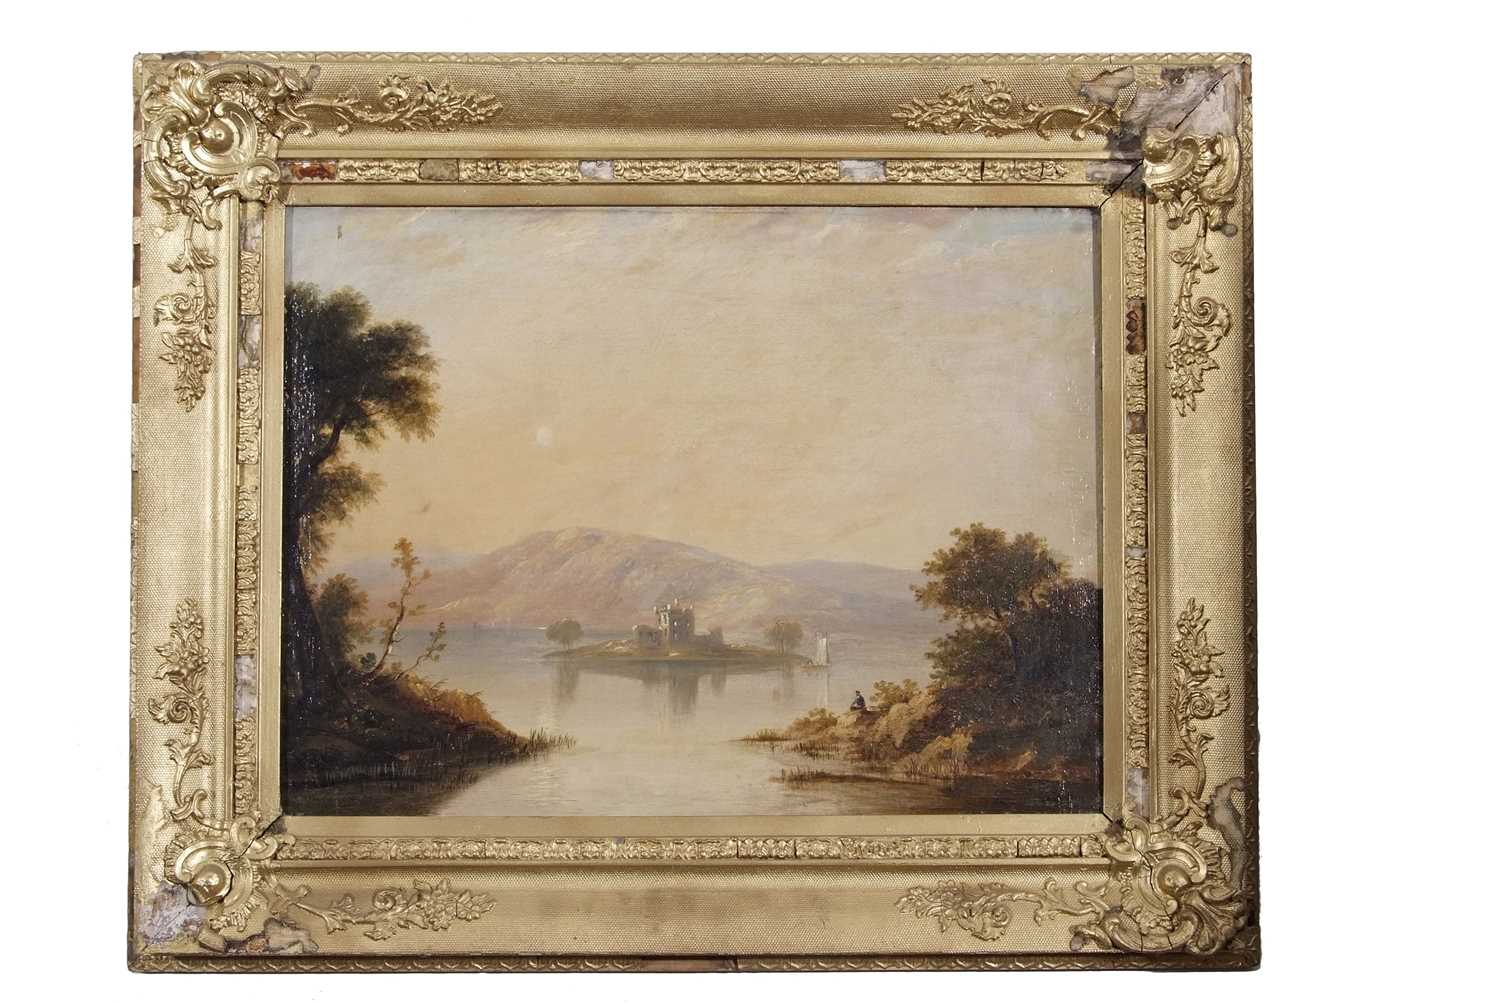 Follower of Alexander Naysmith (1758-1840), A figure by a loch looking out to a ruined castle, oil